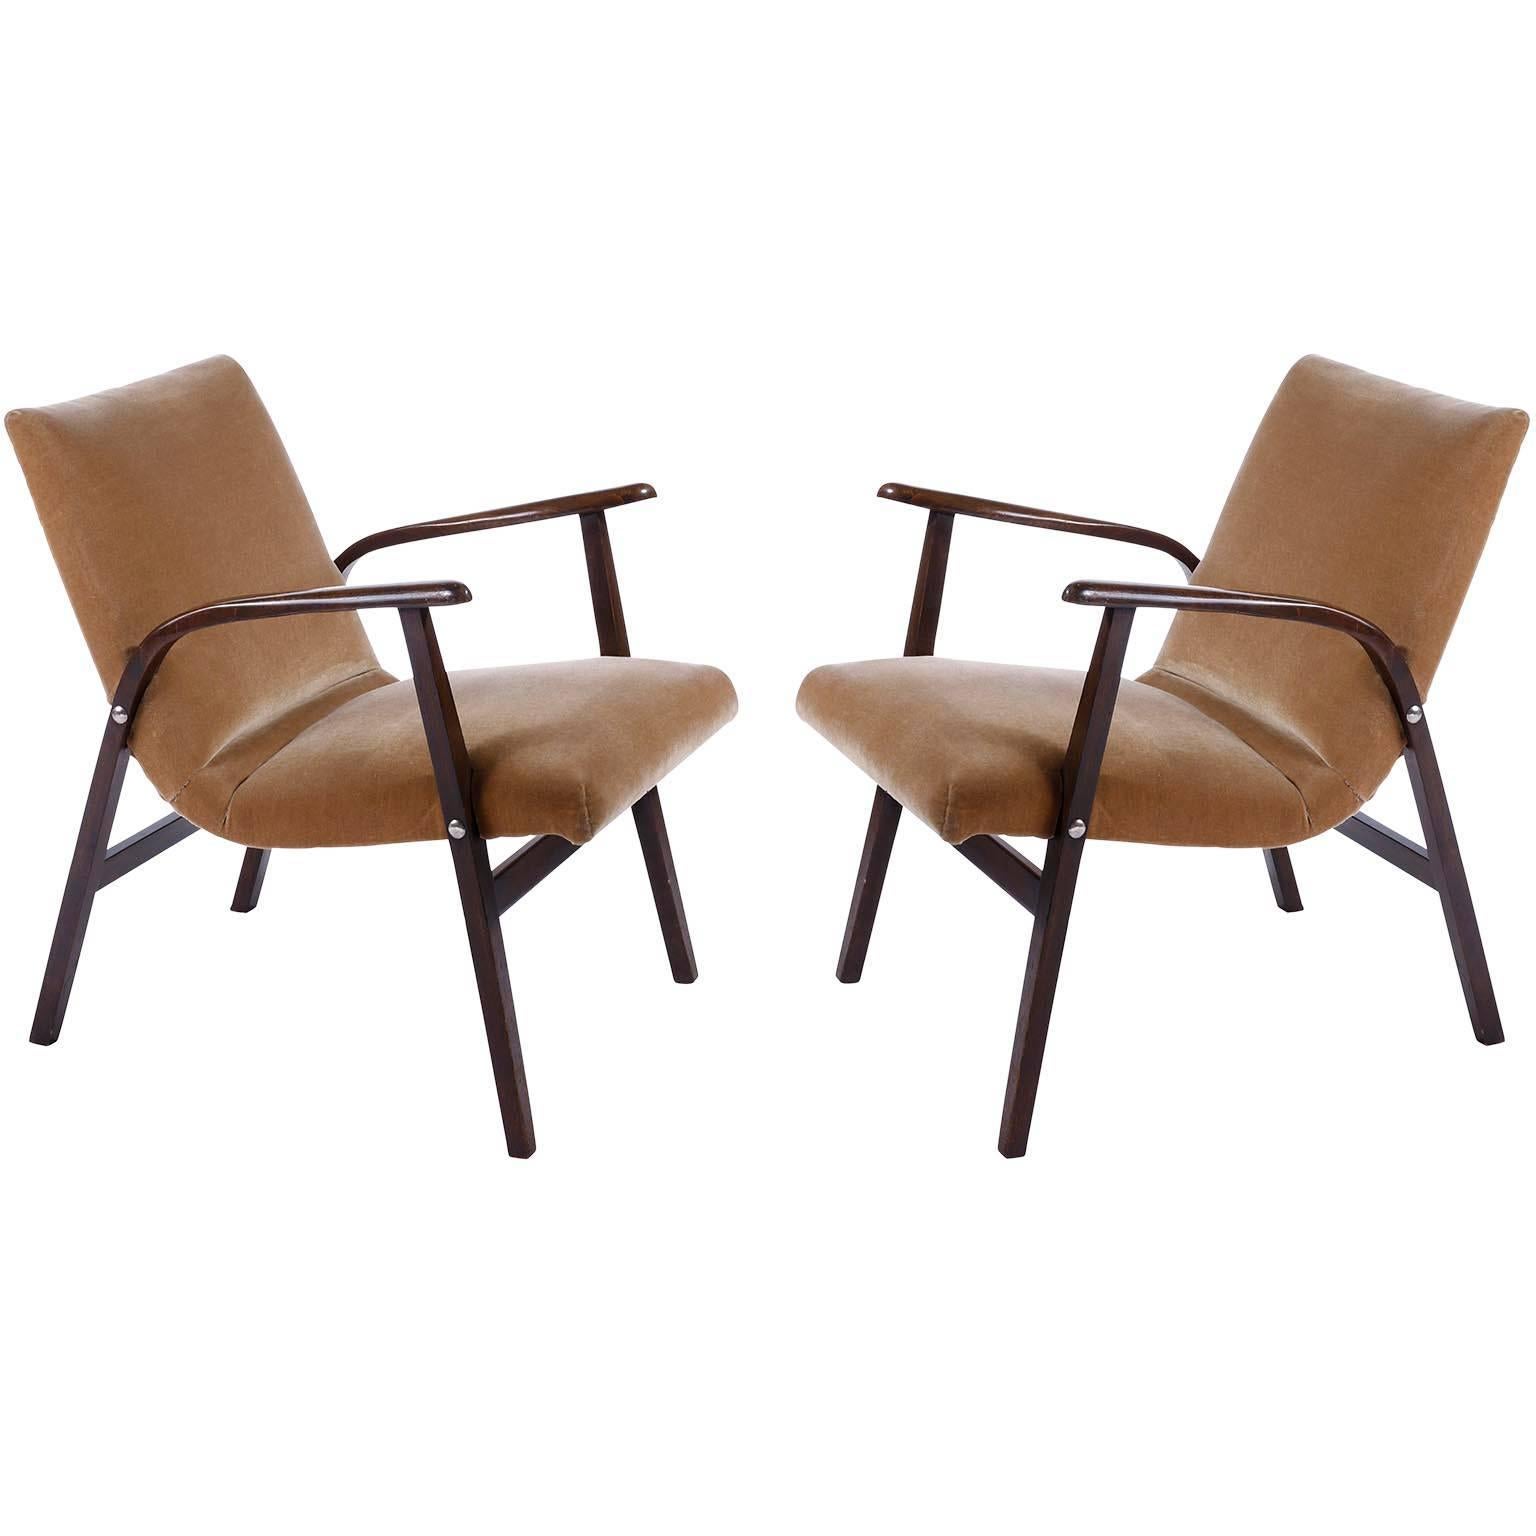 Roland Rainer, Set of 12 Armchairs Stacking Chairs, 1951 6